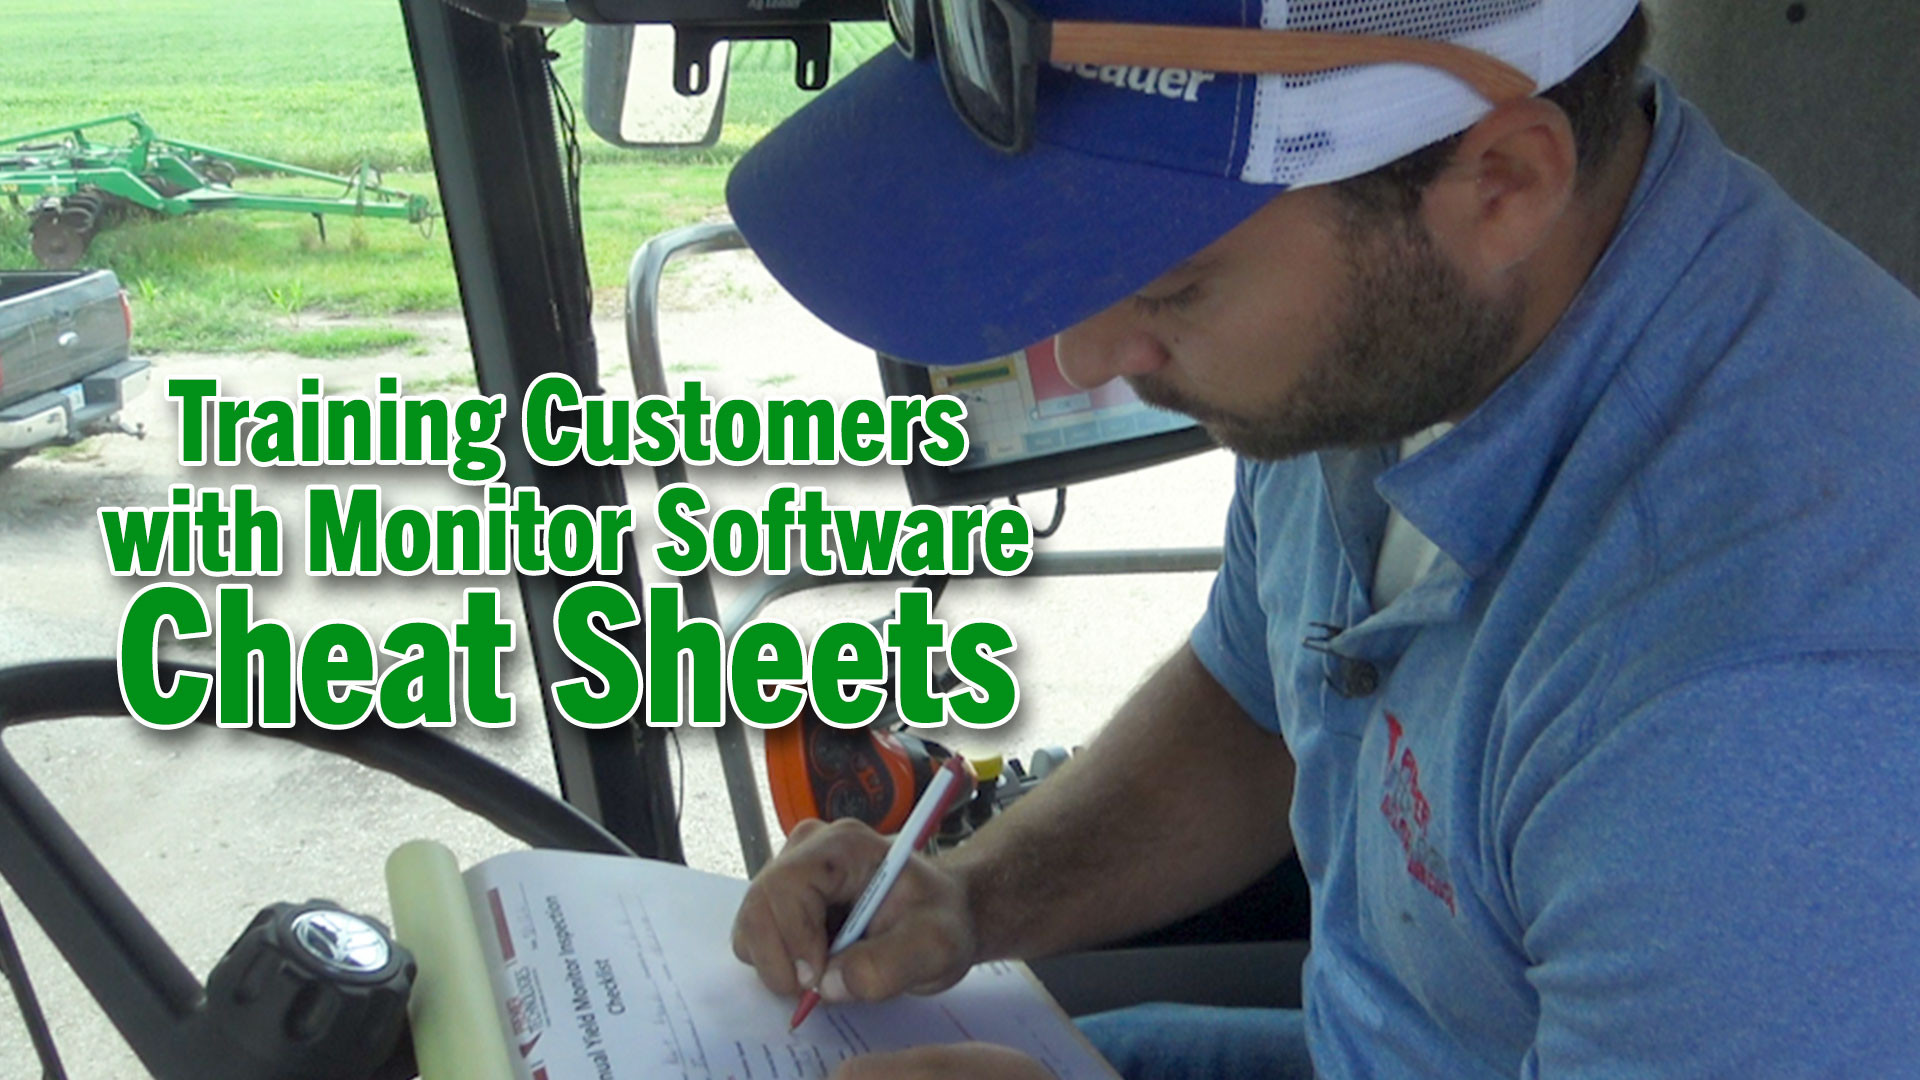 Training-Customers-with-Monitor-Software-Cheat-Sheets.jpg